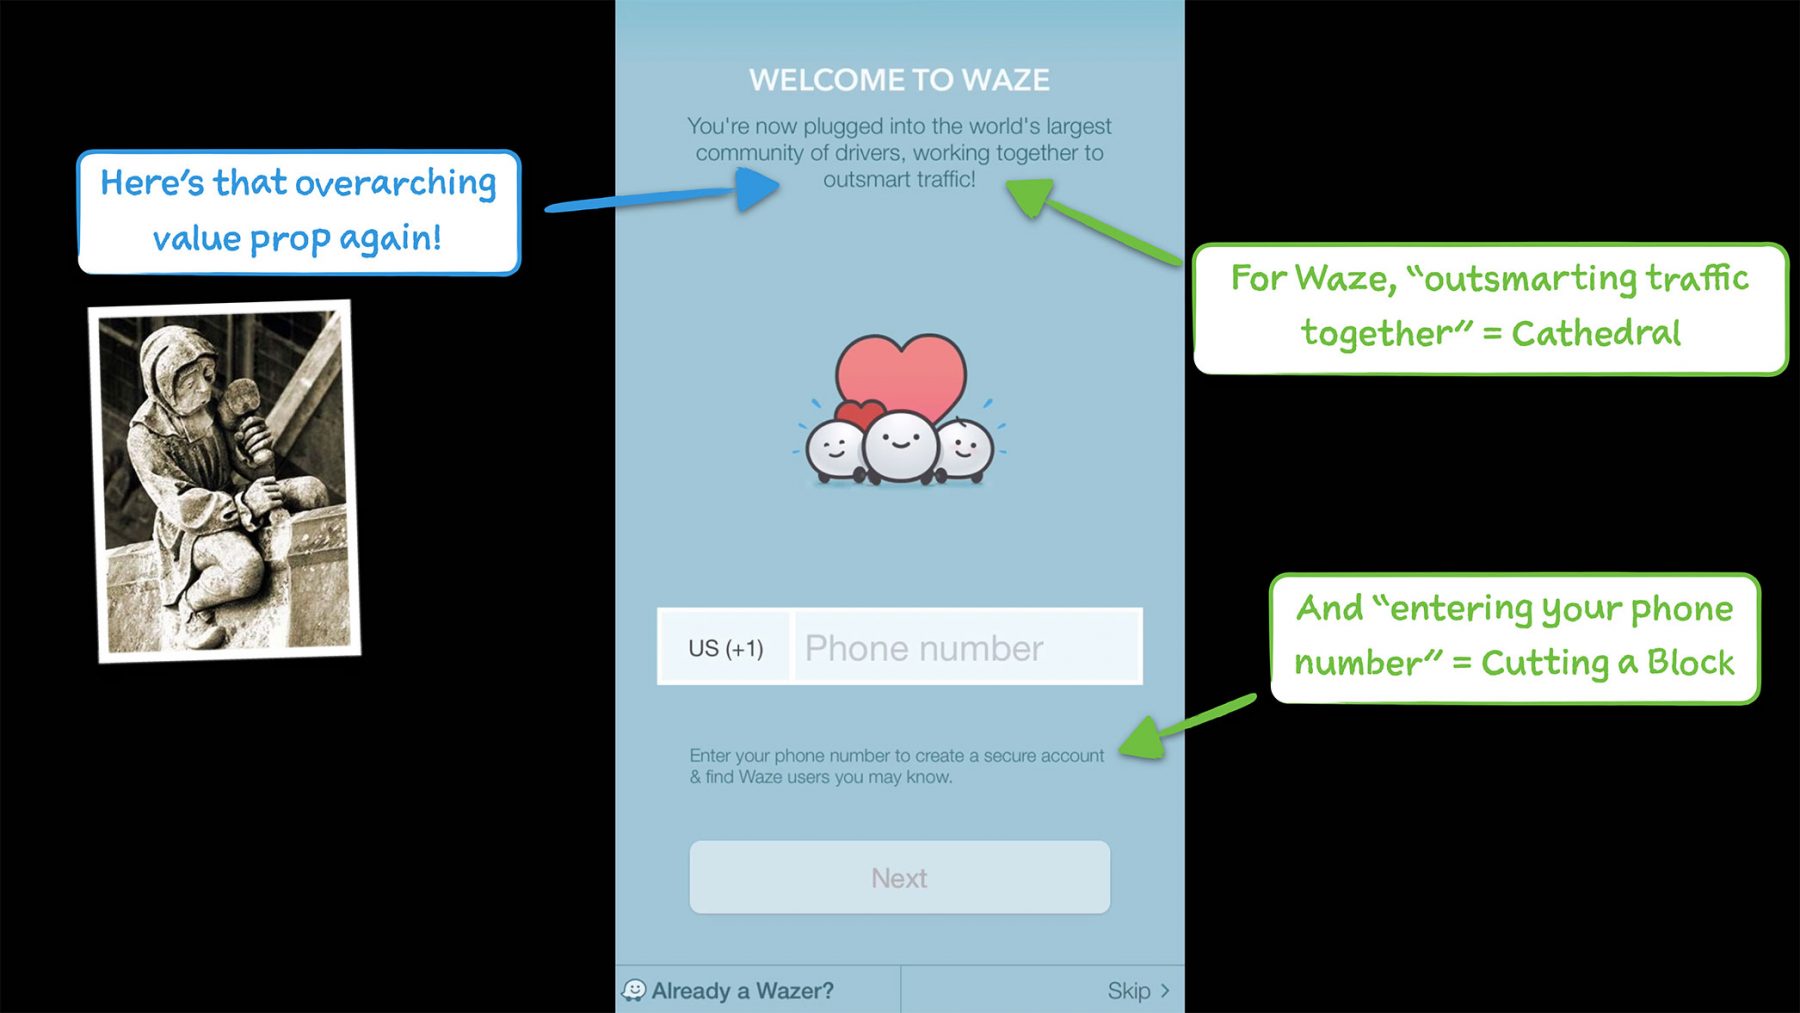 waze tying small action to a grand why in onboarding